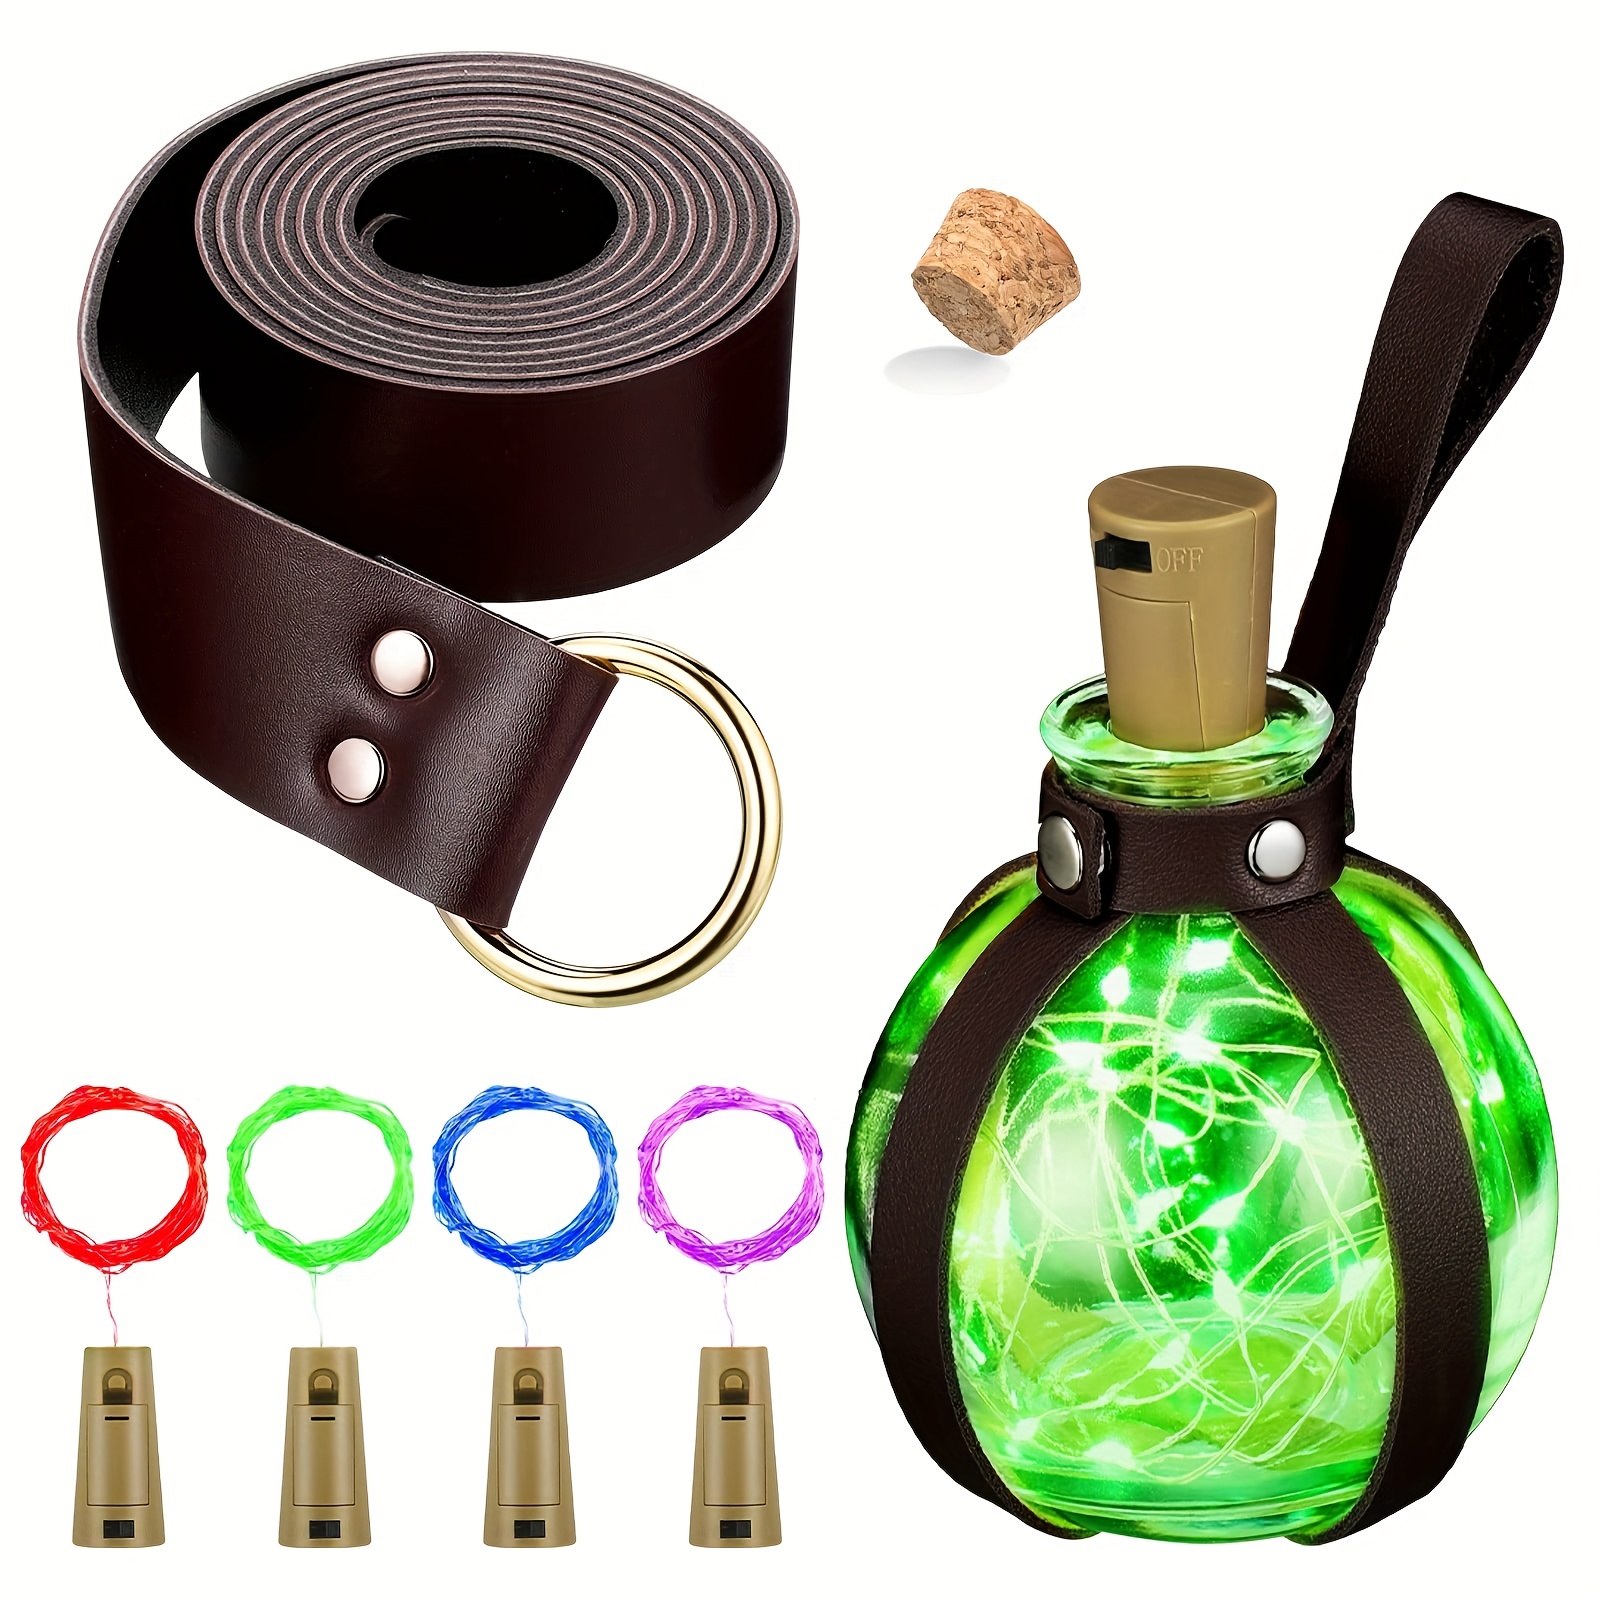 2 Pcs Cork Potion Bottle Cosplay Accessories With Faux Leather Belt  Decorative Potion Bottles Witch Props Witch Costume for Adult Man Round  Spherical